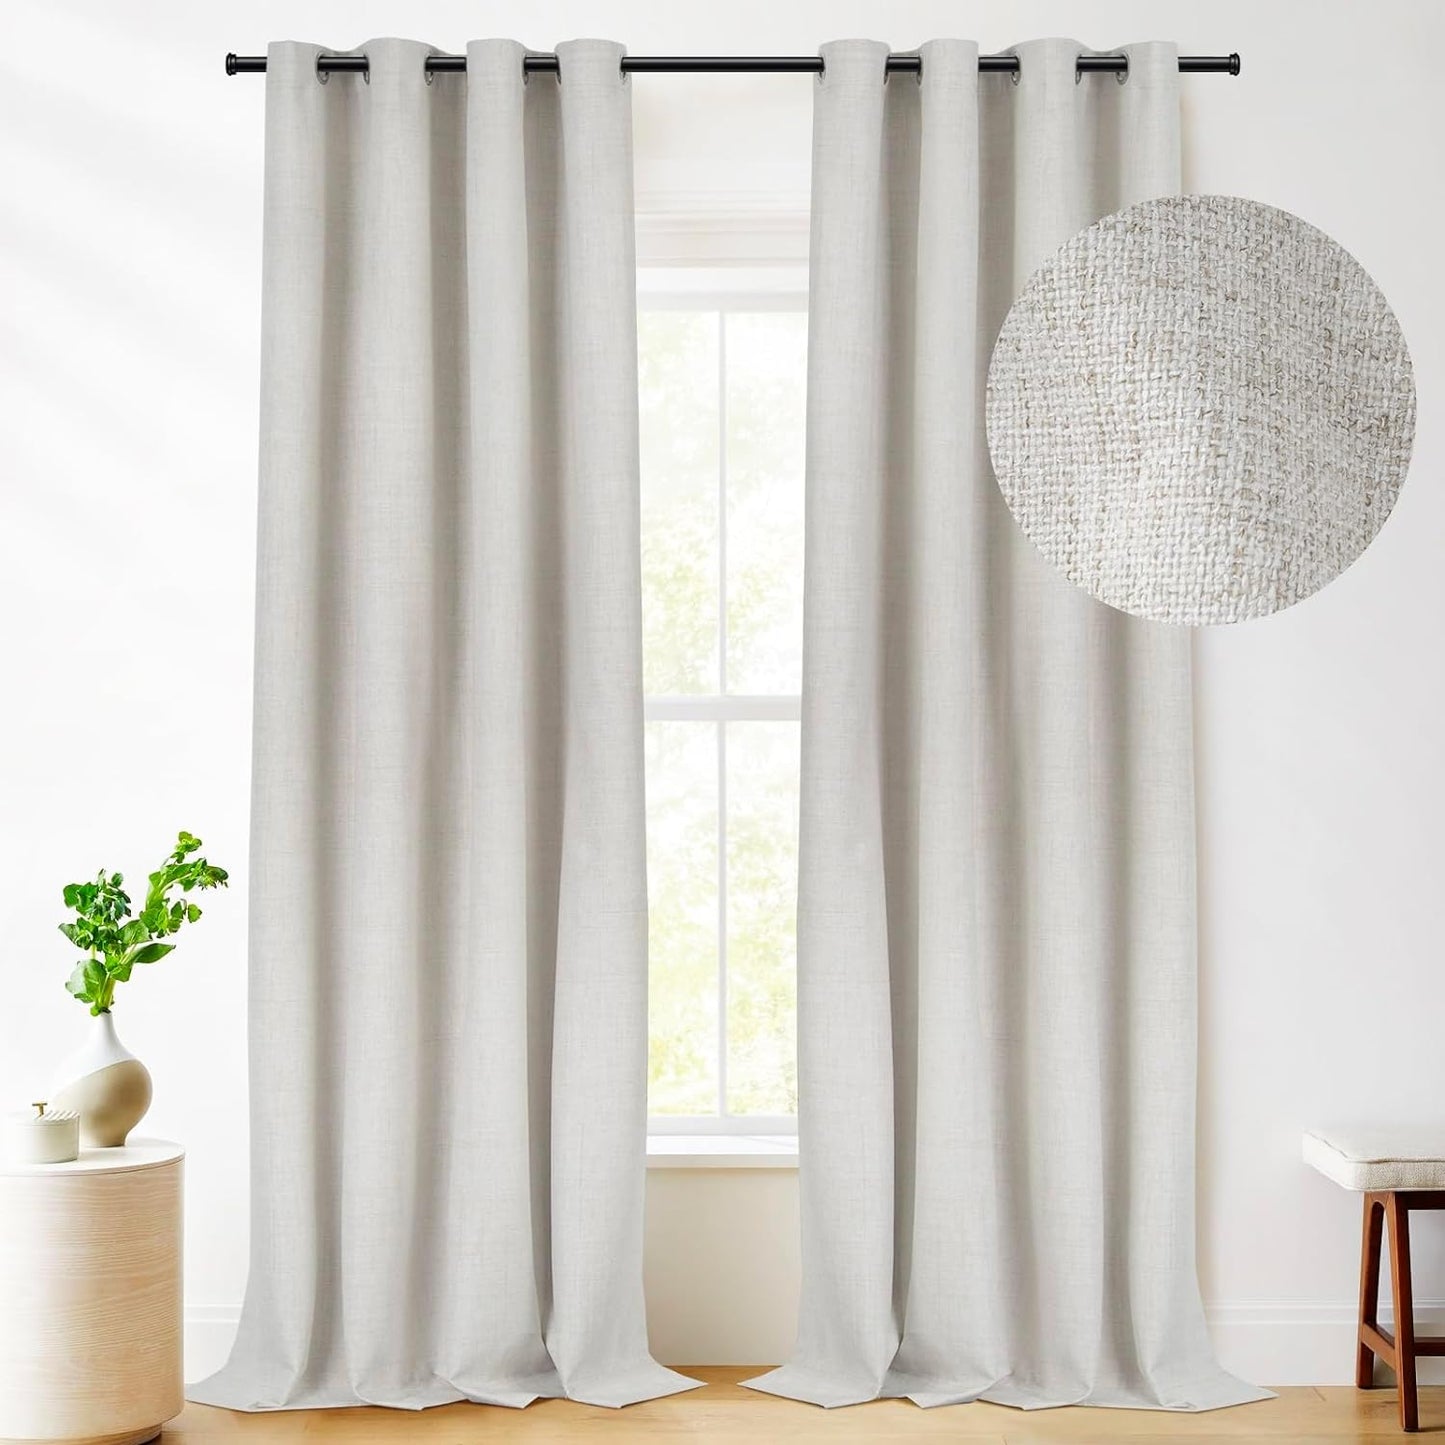 RHF Blackout Curtains 84 Inch Length 2 Panels Set, Primitive Linen Look, 100% Blackout Curtains Linen Black Out Curtains for Bedroom Windows, Burlap Grommet Curtains-(50X84, Oatmeal)  Rose Home Fashion Greyish Beige W50 X L96 